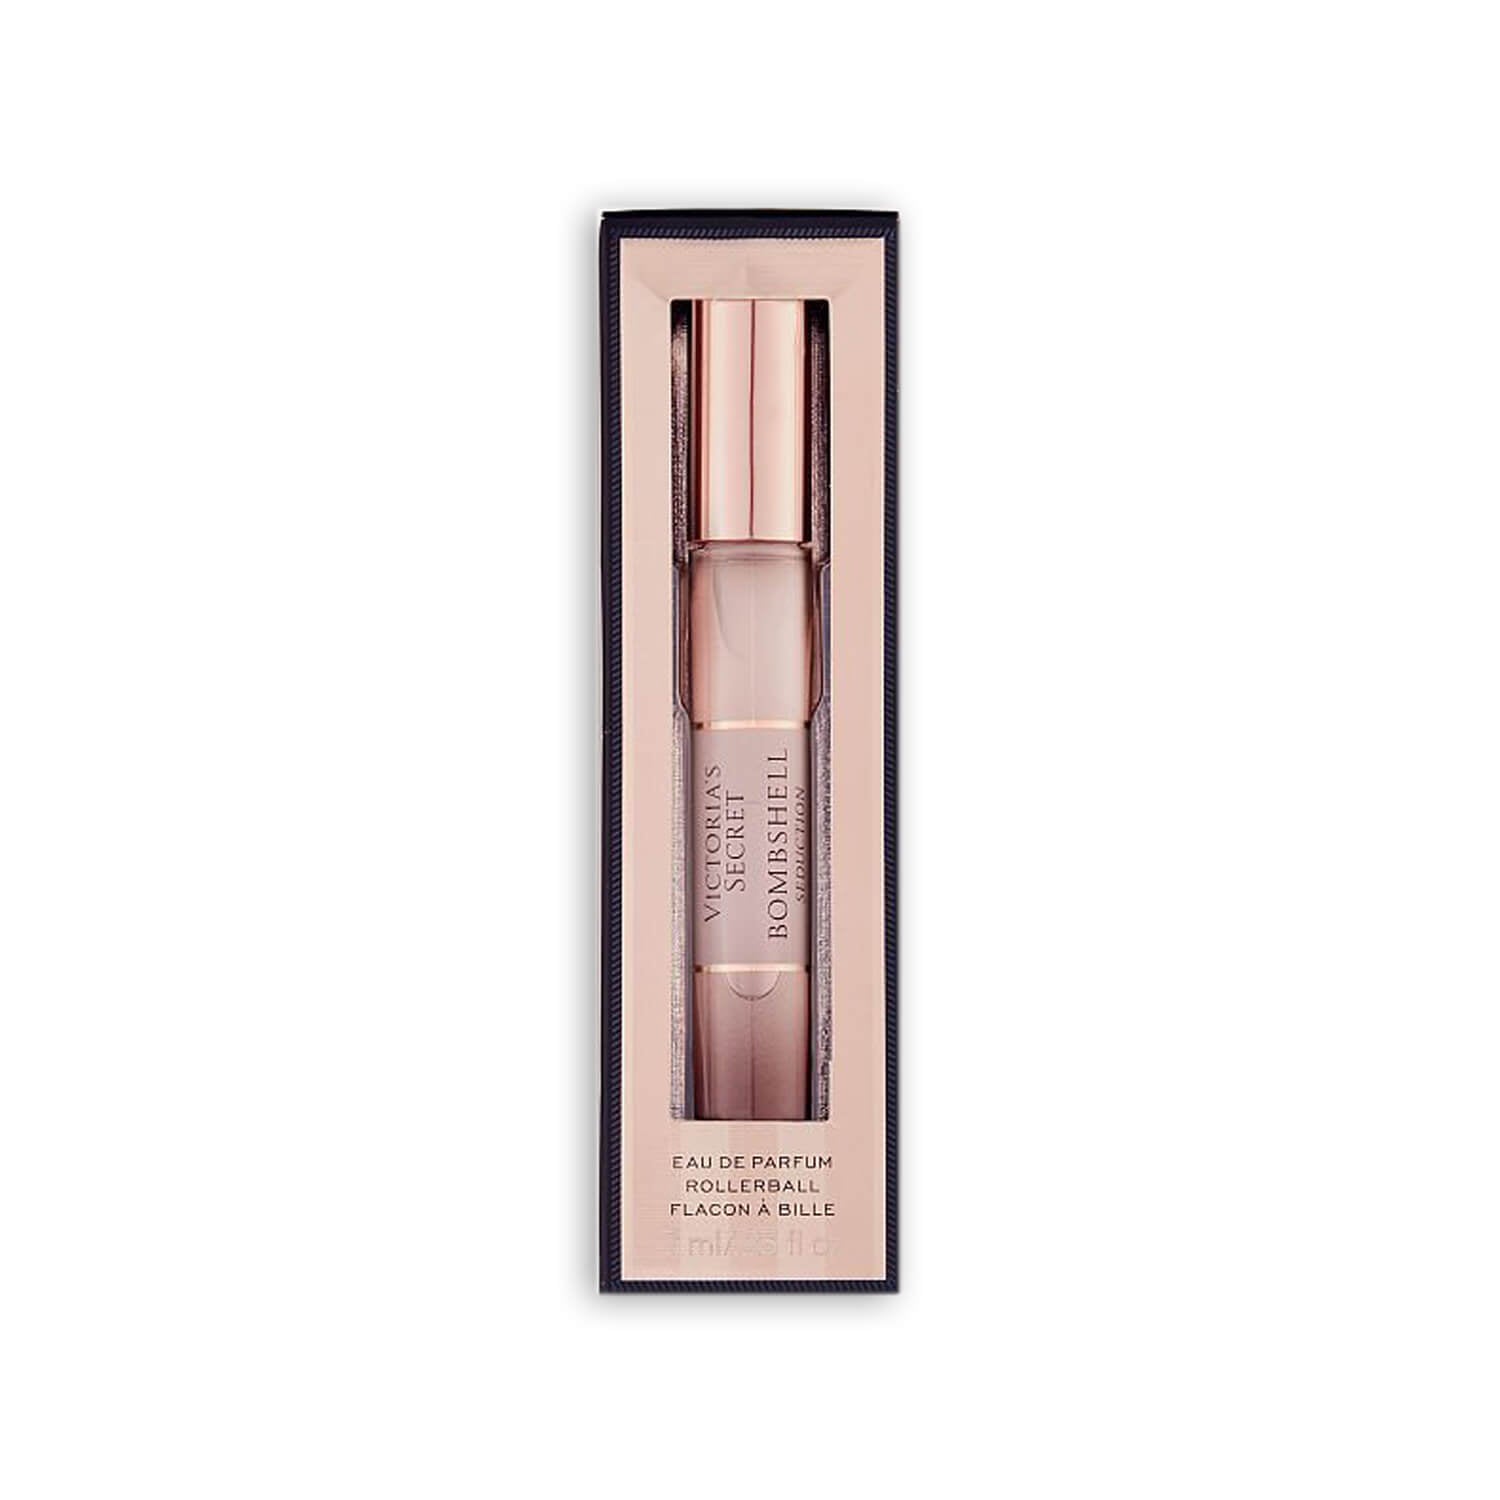 victoria secret bombshell seduction perfume rollerball available at heygirl.pk for delivery in Pakistan